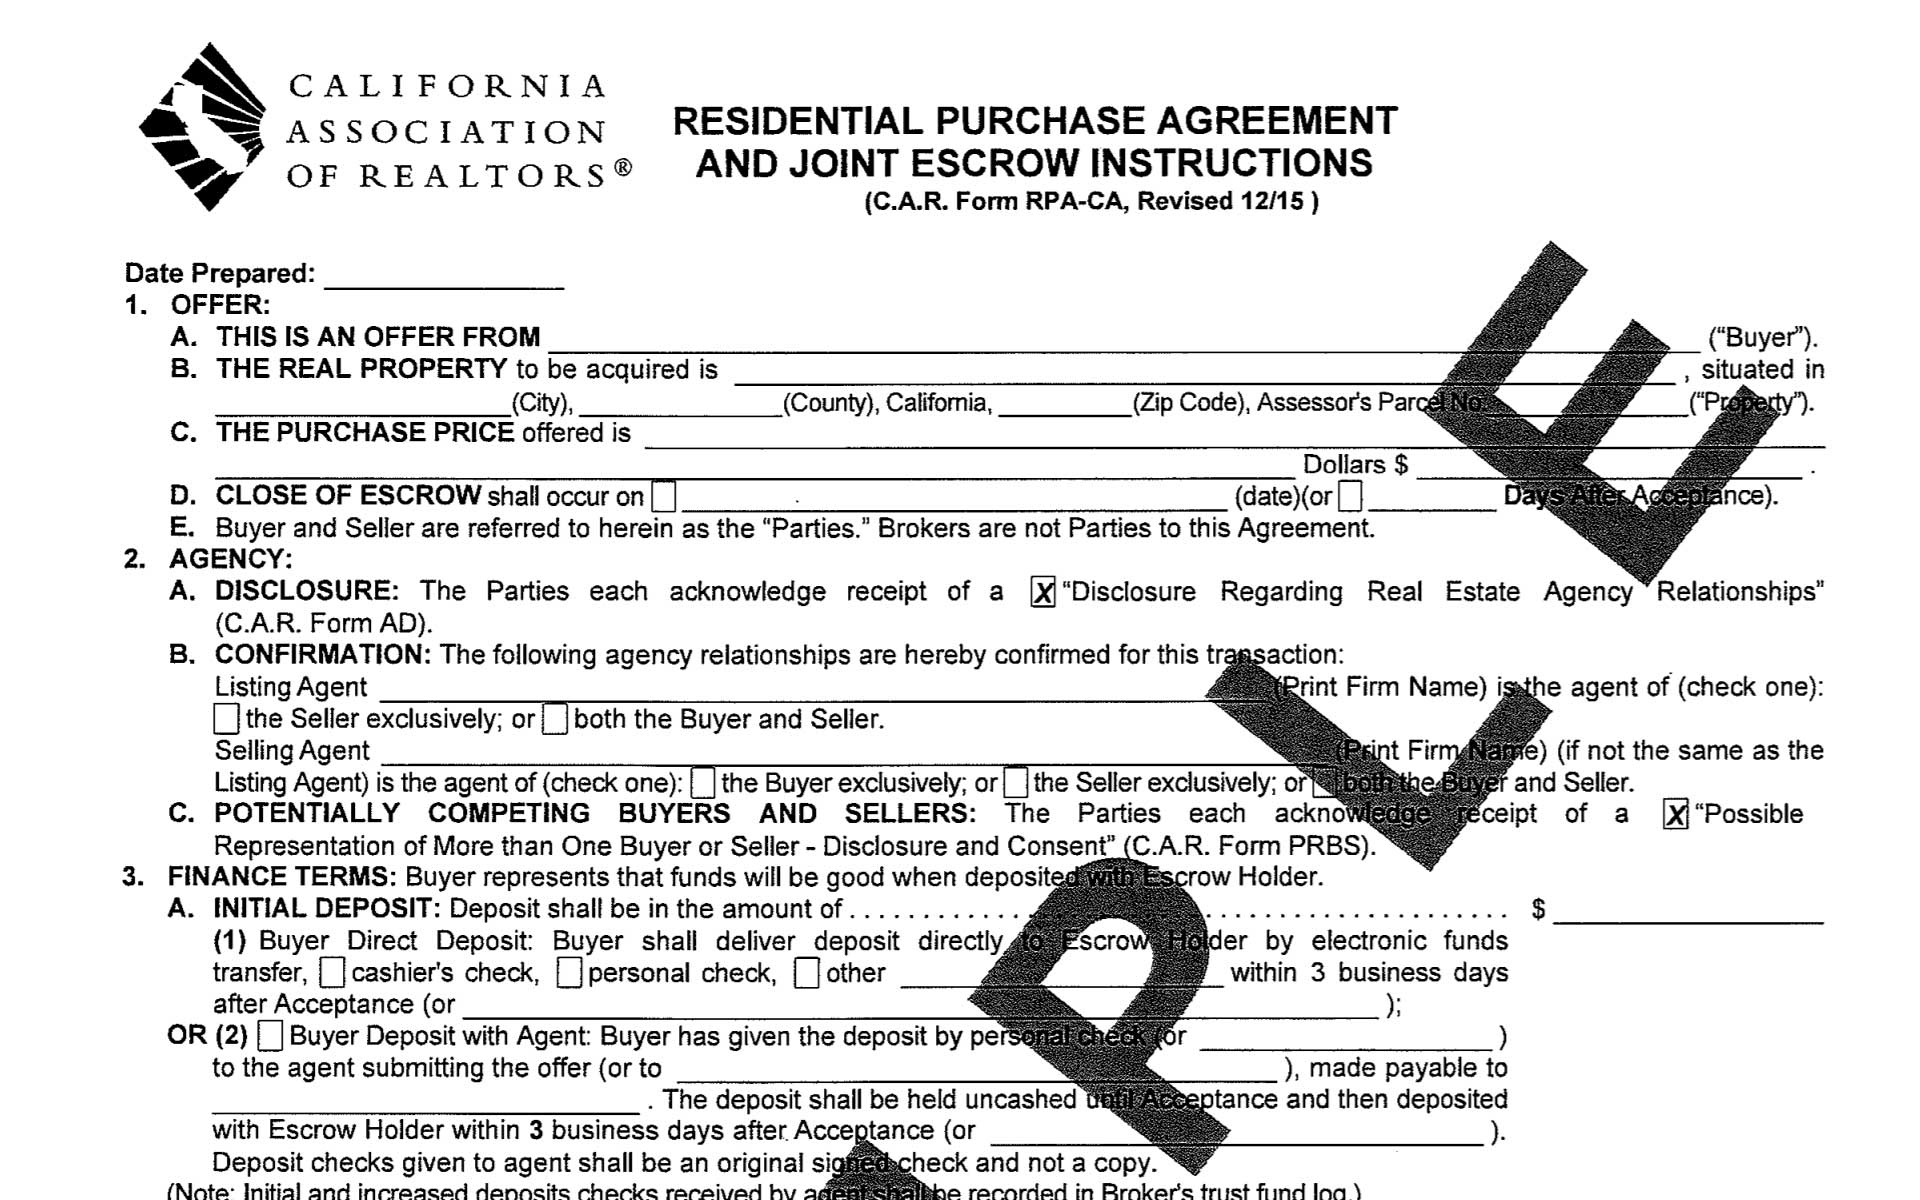 california-residential-purchase-agreement-sycamore-realty-group